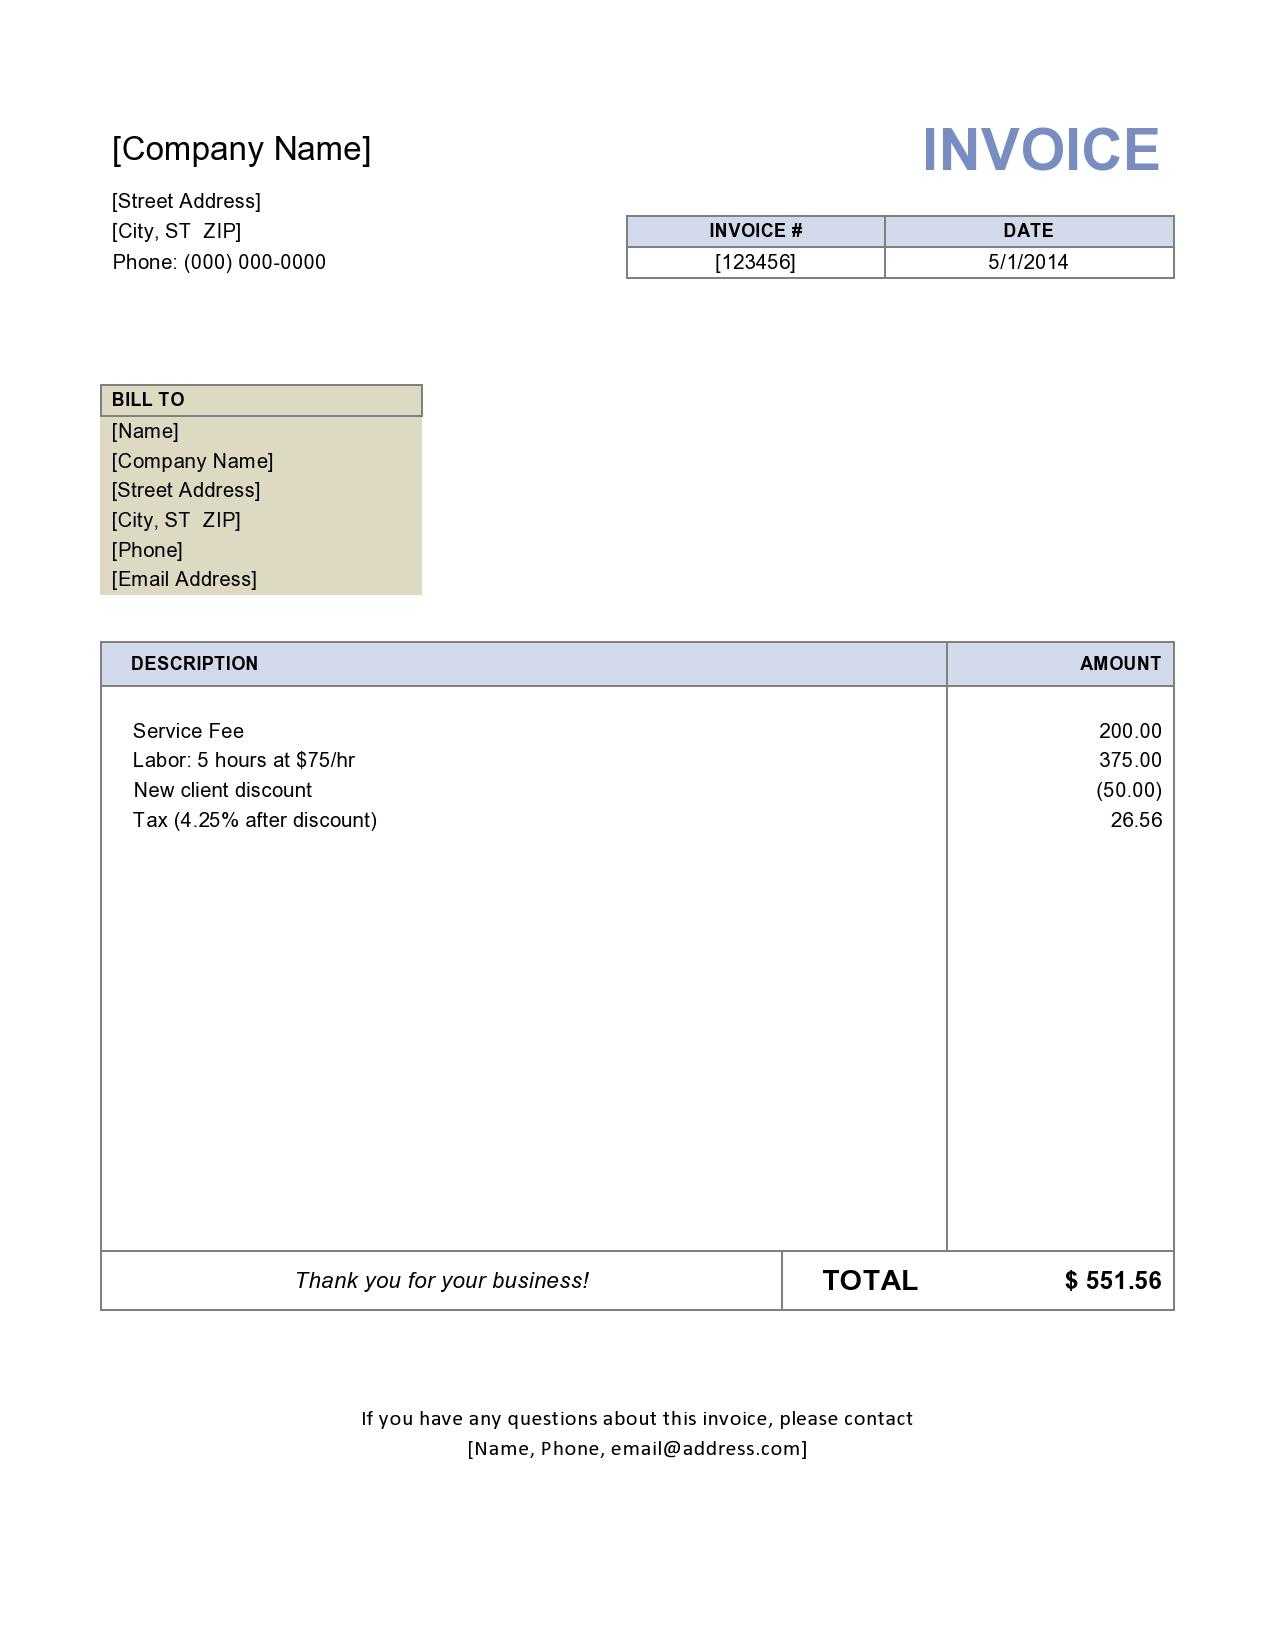 Invoice Template Free | Small Business Invoice Template With Regard To Free Invoice Template Word Mac